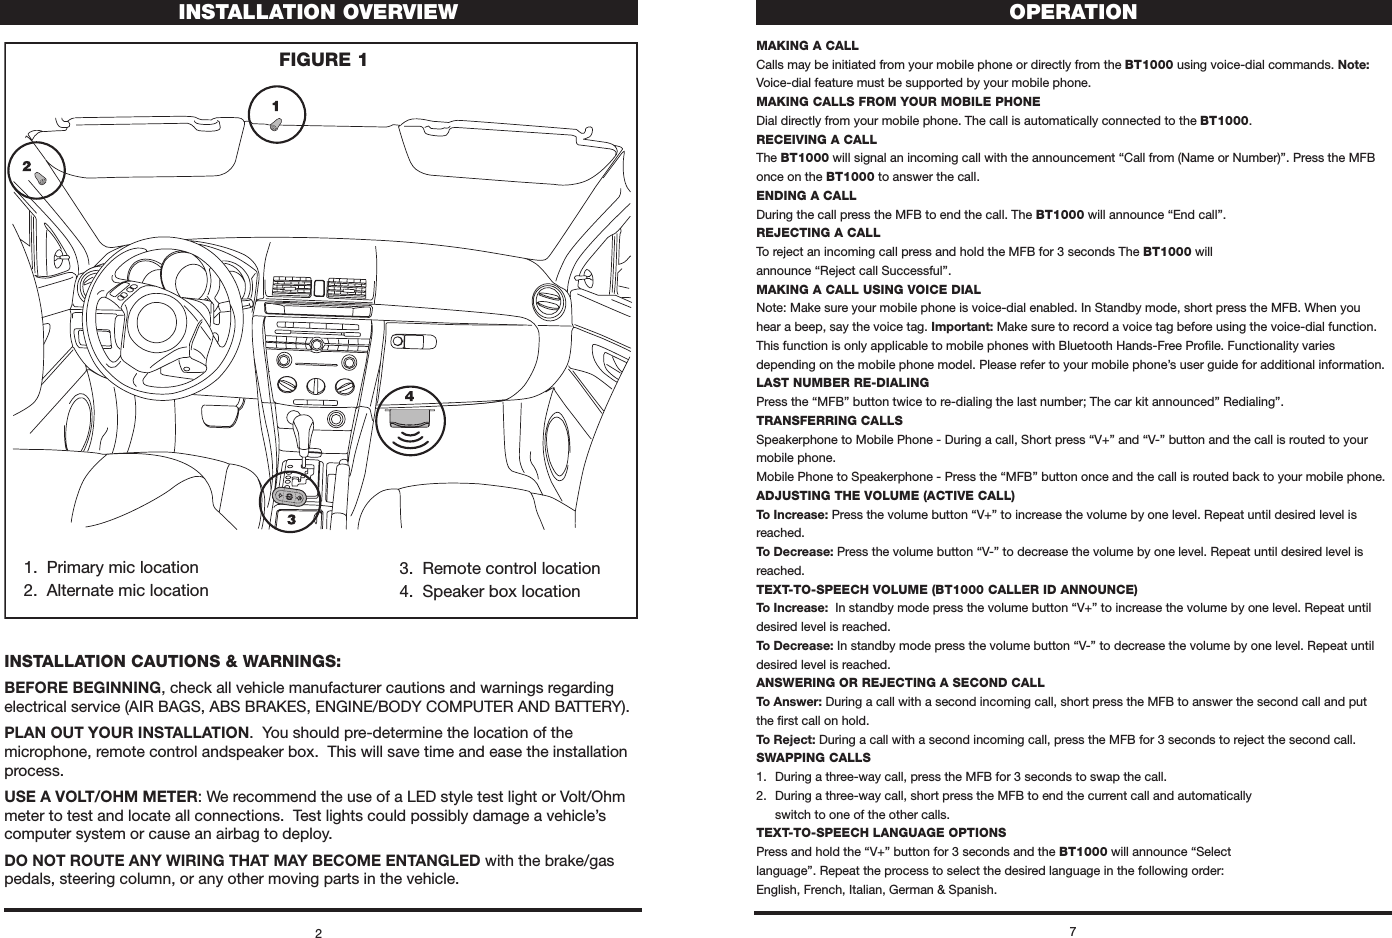 1.  Primary mic location2.  Alternate mic location3.  Remote control location4.  Speaker box locationINSTALLATION CAUTIONS &amp; WARNINgS:BEFORE BEGINNING, check all vehicle manufacturer cautions and warnings regarding electrical service (AIR BAGS, ABS BRAKES, ENGINE/BODY COMPUTER AND BATTERY).PLAN OUT YOUR INSTALLATION.  You should pre-determine the location of the microphone, remote control andspeaker box.  This will save time and ease the installation process.USE A VOLT/OHM METER: We recommend the use of a LED style test light or Volt/Ohm meter to test and locate all connections.  Test lights could possibly damage a vehicle’s computer system or cause an airbag to deploy.DO NOT ROUTE ANY WIRING THAT MAY BECOME ENTANGLED with the brake/gas pedals, steering column, or any other moving parts in the vehicle.2INSTALLATION OVERVIEWFIgURE 17OPERATIONmAKINg A CALLCalls may be initiated from your mobile phone or directly from the BT1000 using voice-dial commands. Note: Voice-dial feature must be supported by your mobile phone.mAKINg CALLS FROm yOUR mOBILE PHONEDial directly from your mobile phone. The call is automatically connected to the BT1000.RECEIVINg A CALLThe BT1000 will signal an incoming call with the announcement “Call from (Name or Number)”. Press the MFB once on the BT1000 to answer the call.ENDINg A CALLDuring the call press the MFB to end the call. The BT1000 will announce “End call”.REJECTINg A CALLTo reject an incoming call press and hold the MFB for 3 seconds The BT1000 will  announce “Reject call Successful”.mAKINg A CALL USINg VOICE DIALNote: Make sure your mobile phone is voice-dial enabled. In Standby mode, short press the MFB. When you hear a beep, say the voice tag. Important: Make sure to record a voice tag before using the voice-dial function. This function is only applicable to mobile phones with Bluetooth Hands-Free Proﬁle. Functionality varies depending on the mobile phone model. Please refer to your mobile phone’s user guide for additional information.LAST NUmBER RE-DIALINgPress the “MFB” button twice to re-dialing the last number; The car kit announced” Redialing”.TRANSFERRINg CALLSSpeakerphone to Mobile Phone - During a call, Short press “V+” and “V-” button and the call is routed to your mobile phone.Mobile Phone to Speakerphone - Press the “MFB” button once and the call is routed back to your mobile phone.ADJUSTINg THE VOLUmE (ACTIVE CALL)To Increase: Press the volume button “V+” to increase the volume by one level. Repeat until desired level is reached. To Decrease: Press the volume button “V-” to decrease the volume by one level. Repeat until desired level is reached. TEXT-TO-SPEECH VOLUmE (BT1000 CALLER ID ANNOUNCE)To Increase:  In standby mode press the volume button “V+” to increase the volume by one level. Repeat until desired level is reached. To Decrease: In standby mode press the volume button “V-” to decrease the volume by one level. Repeat until desired level is reached.ANSWERINg OR REJECTINg A SECOND CALLTo Answer: During a call with a second incoming call, short press the MFB to answer the second call and put the ﬁrst call on hold. To Reject: During a call with a second incoming call, press the MFB for 3 seconds to reject the second call.SWAPPINg CALLS1.  During a three-way call, press the MFB for 3 seconds to swap the call.2.  During a three-way call, short press the MFB to end the current call and automatically    switch to one of the other calls.TEXT-TO-SPEECH LANgUAgE OPTIONSPress and hold the “V+” button for 3 seconds and the BT1000 will announce “Select  language”. Repeat the process to select the desired language in the following order:  English, French, Italian, German &amp; Spanish. 